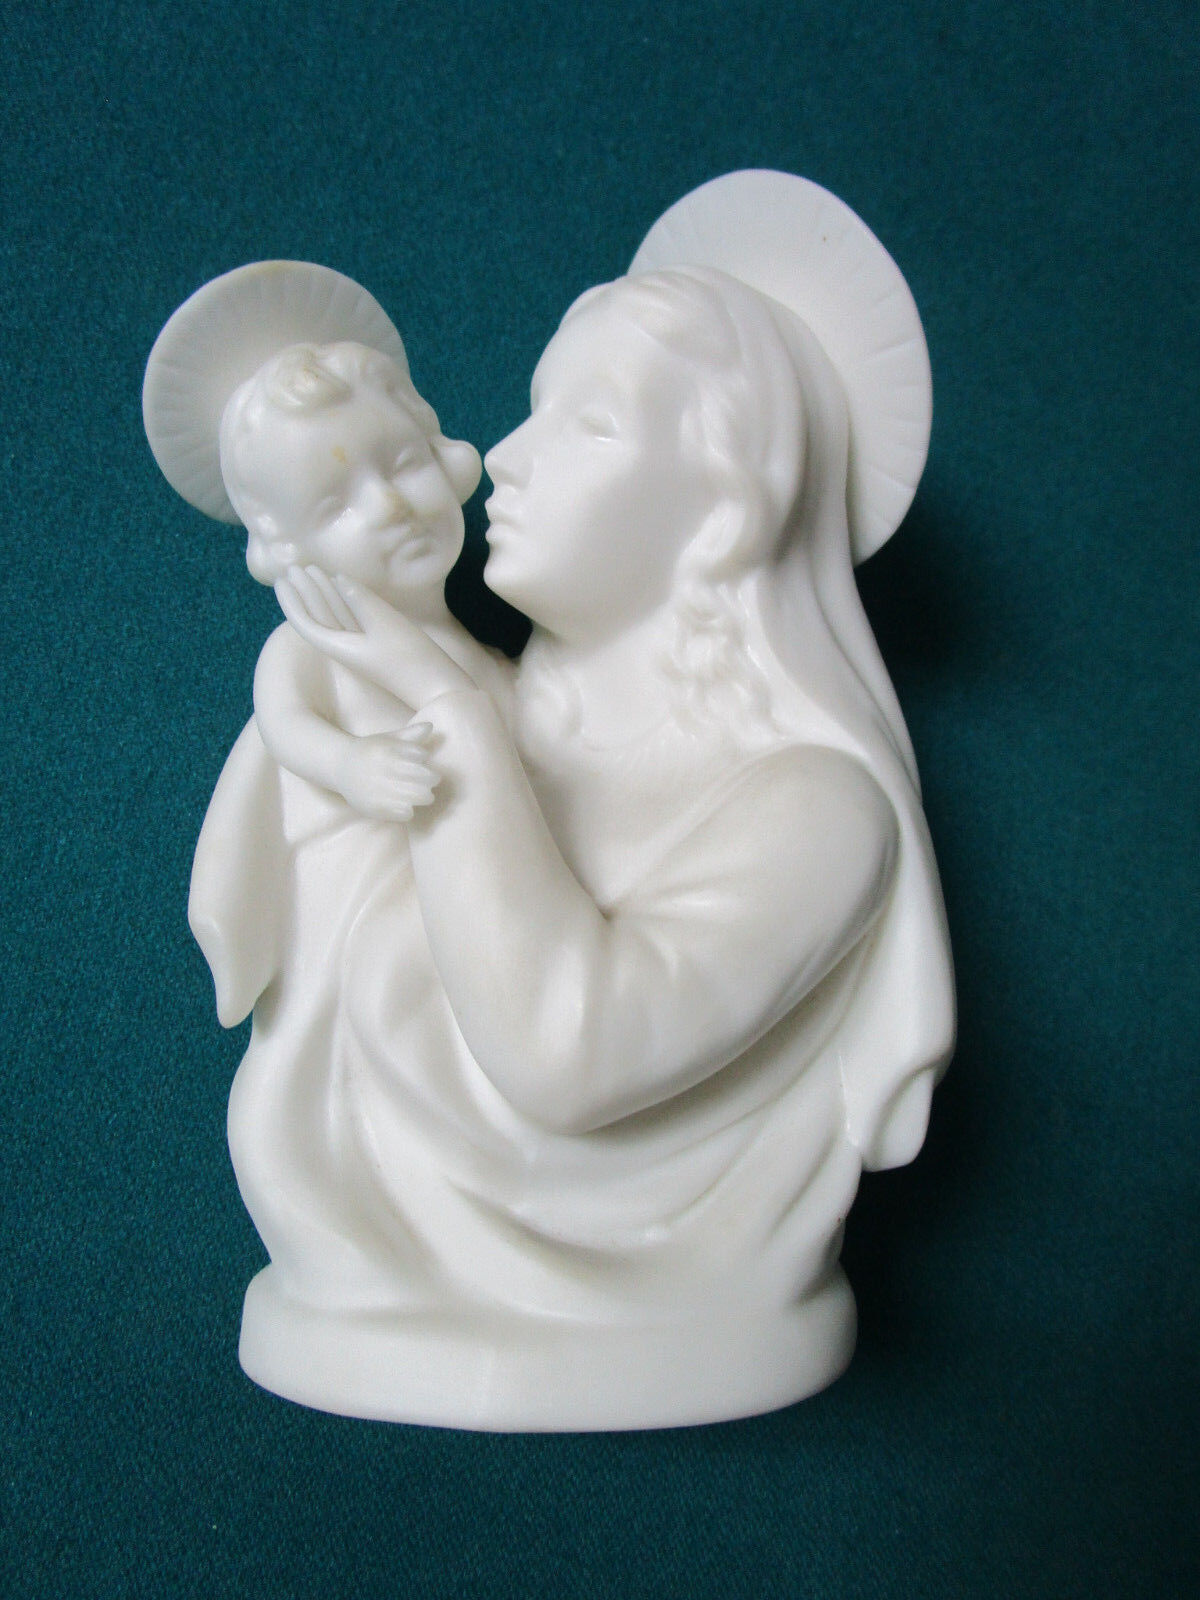 Primary image for WHITE SILHOUETTE MADONNA AND CHILD BY LENWILE ARDALT JAPAN 1940s 7" [*76]